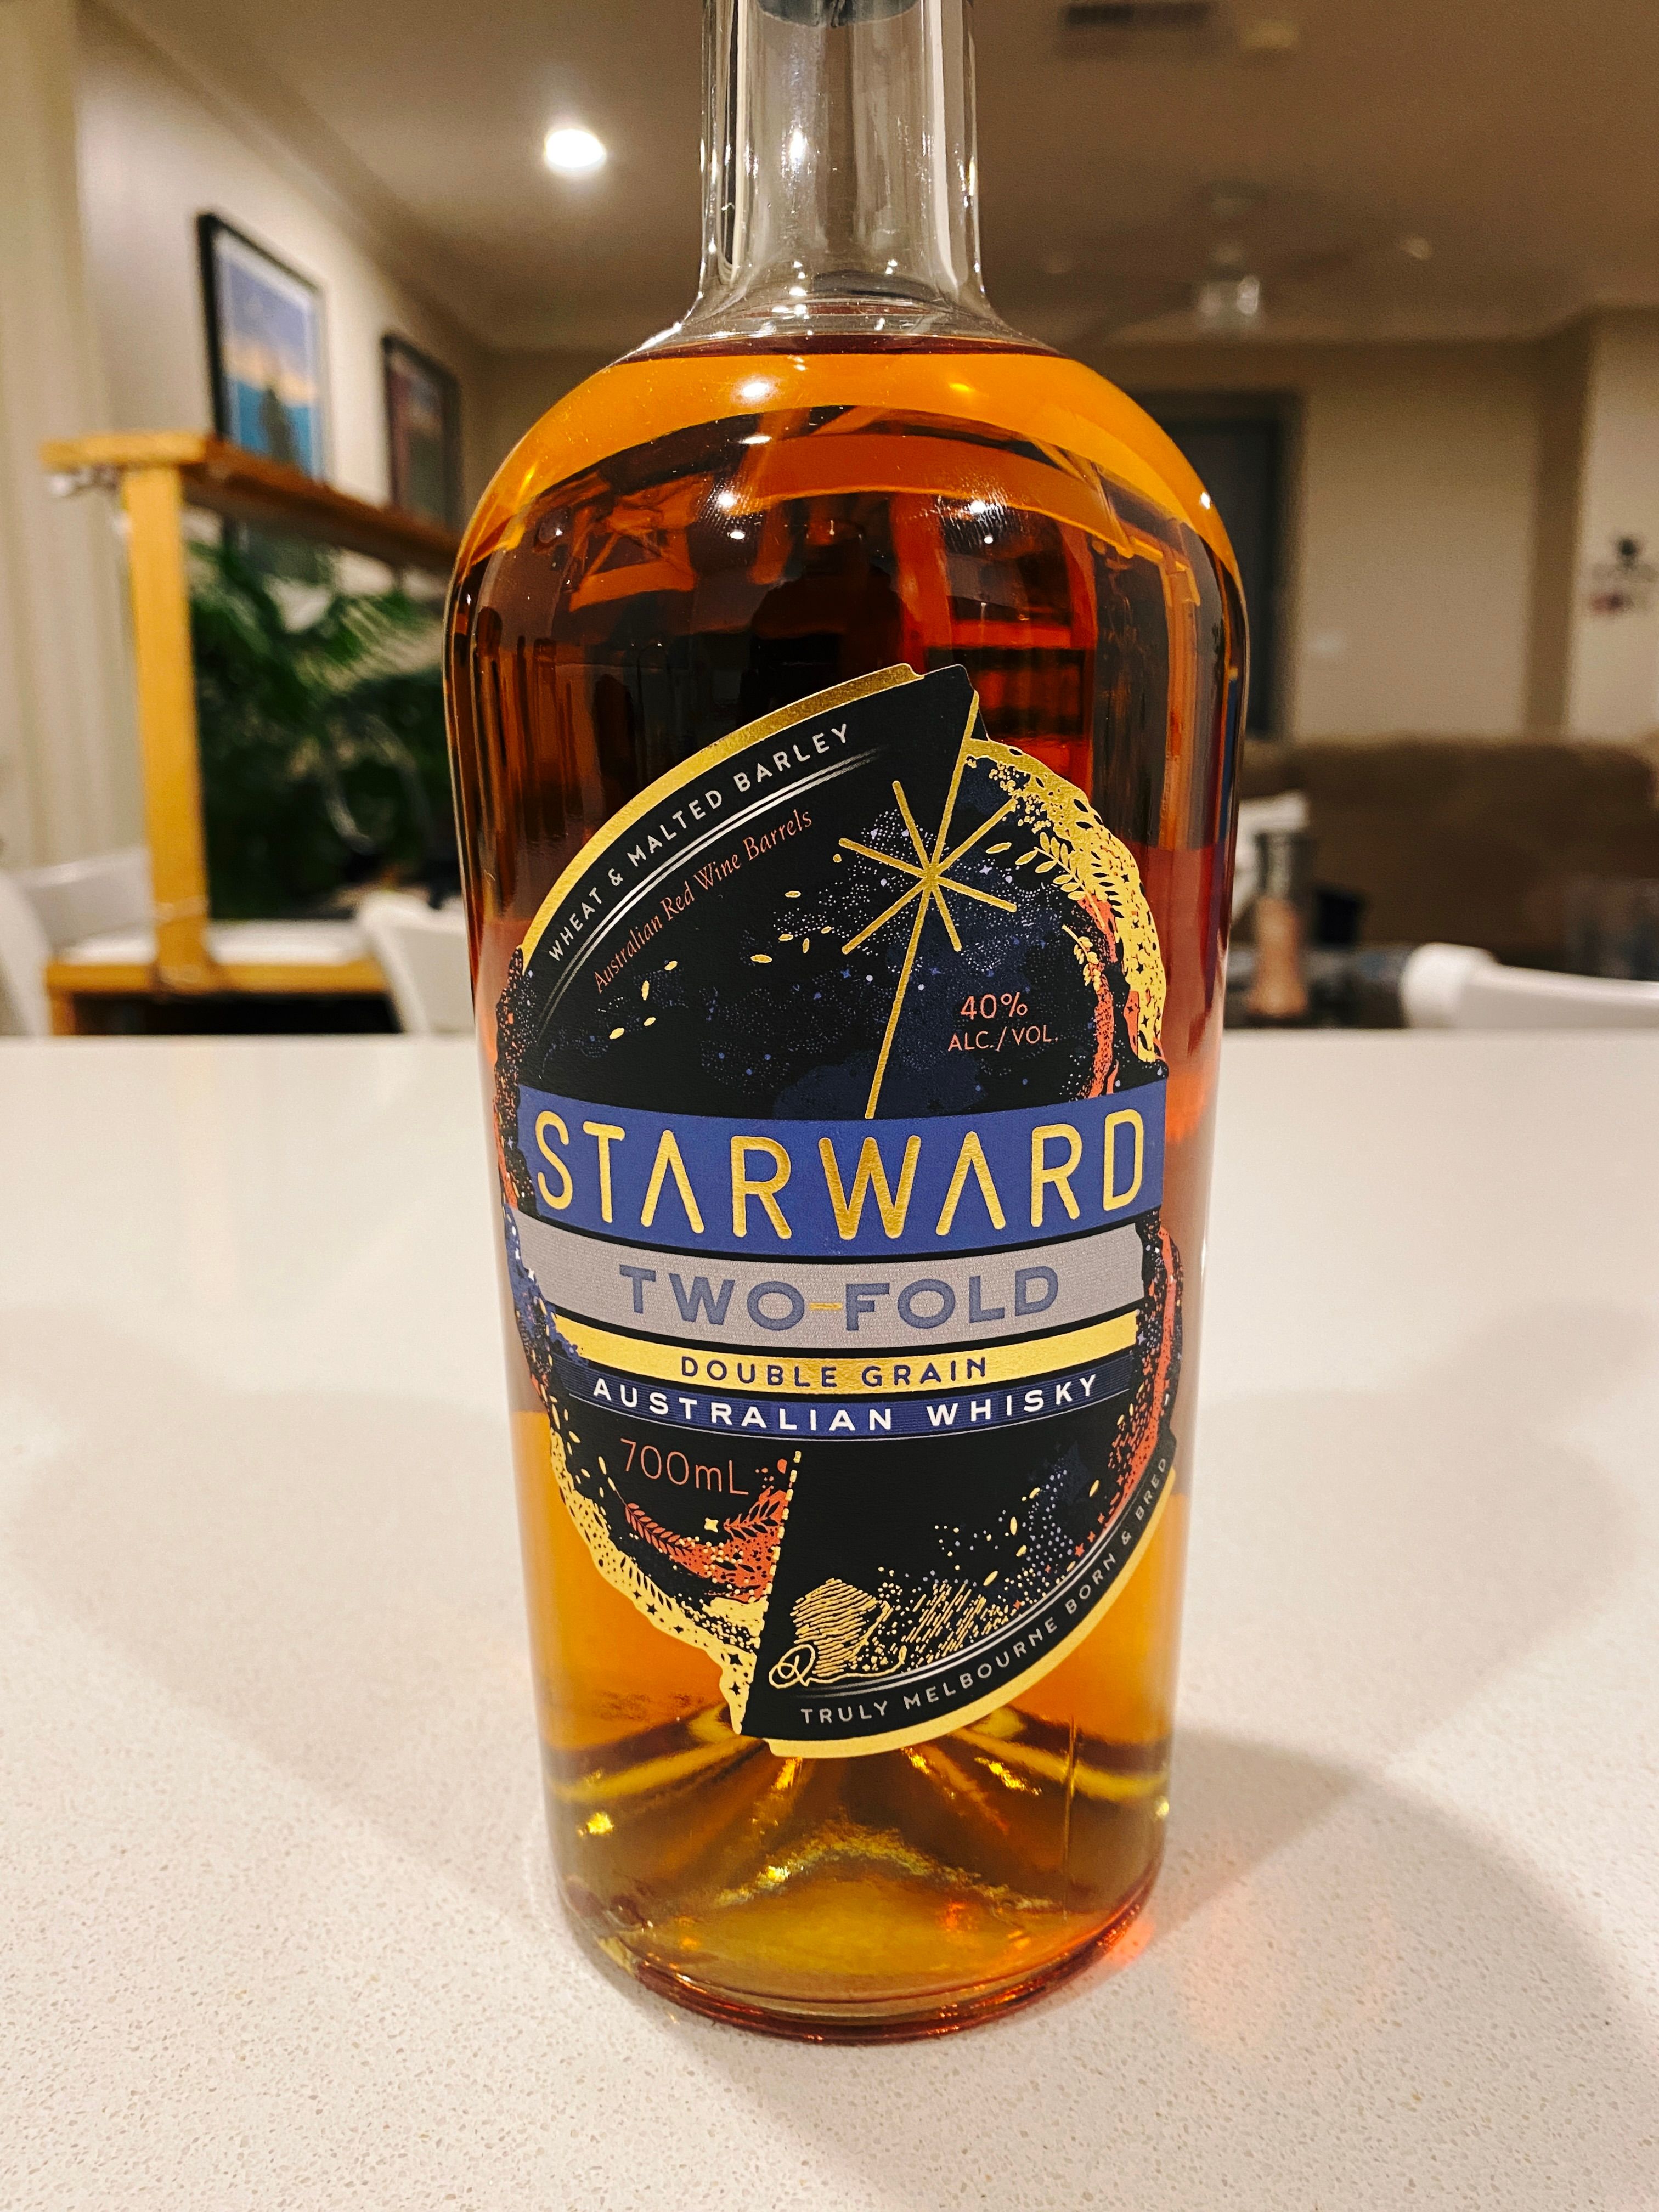 A photo of a bottle of Starward brand "Two Fold" Australian whisky. The label is all handsome blue and gold.